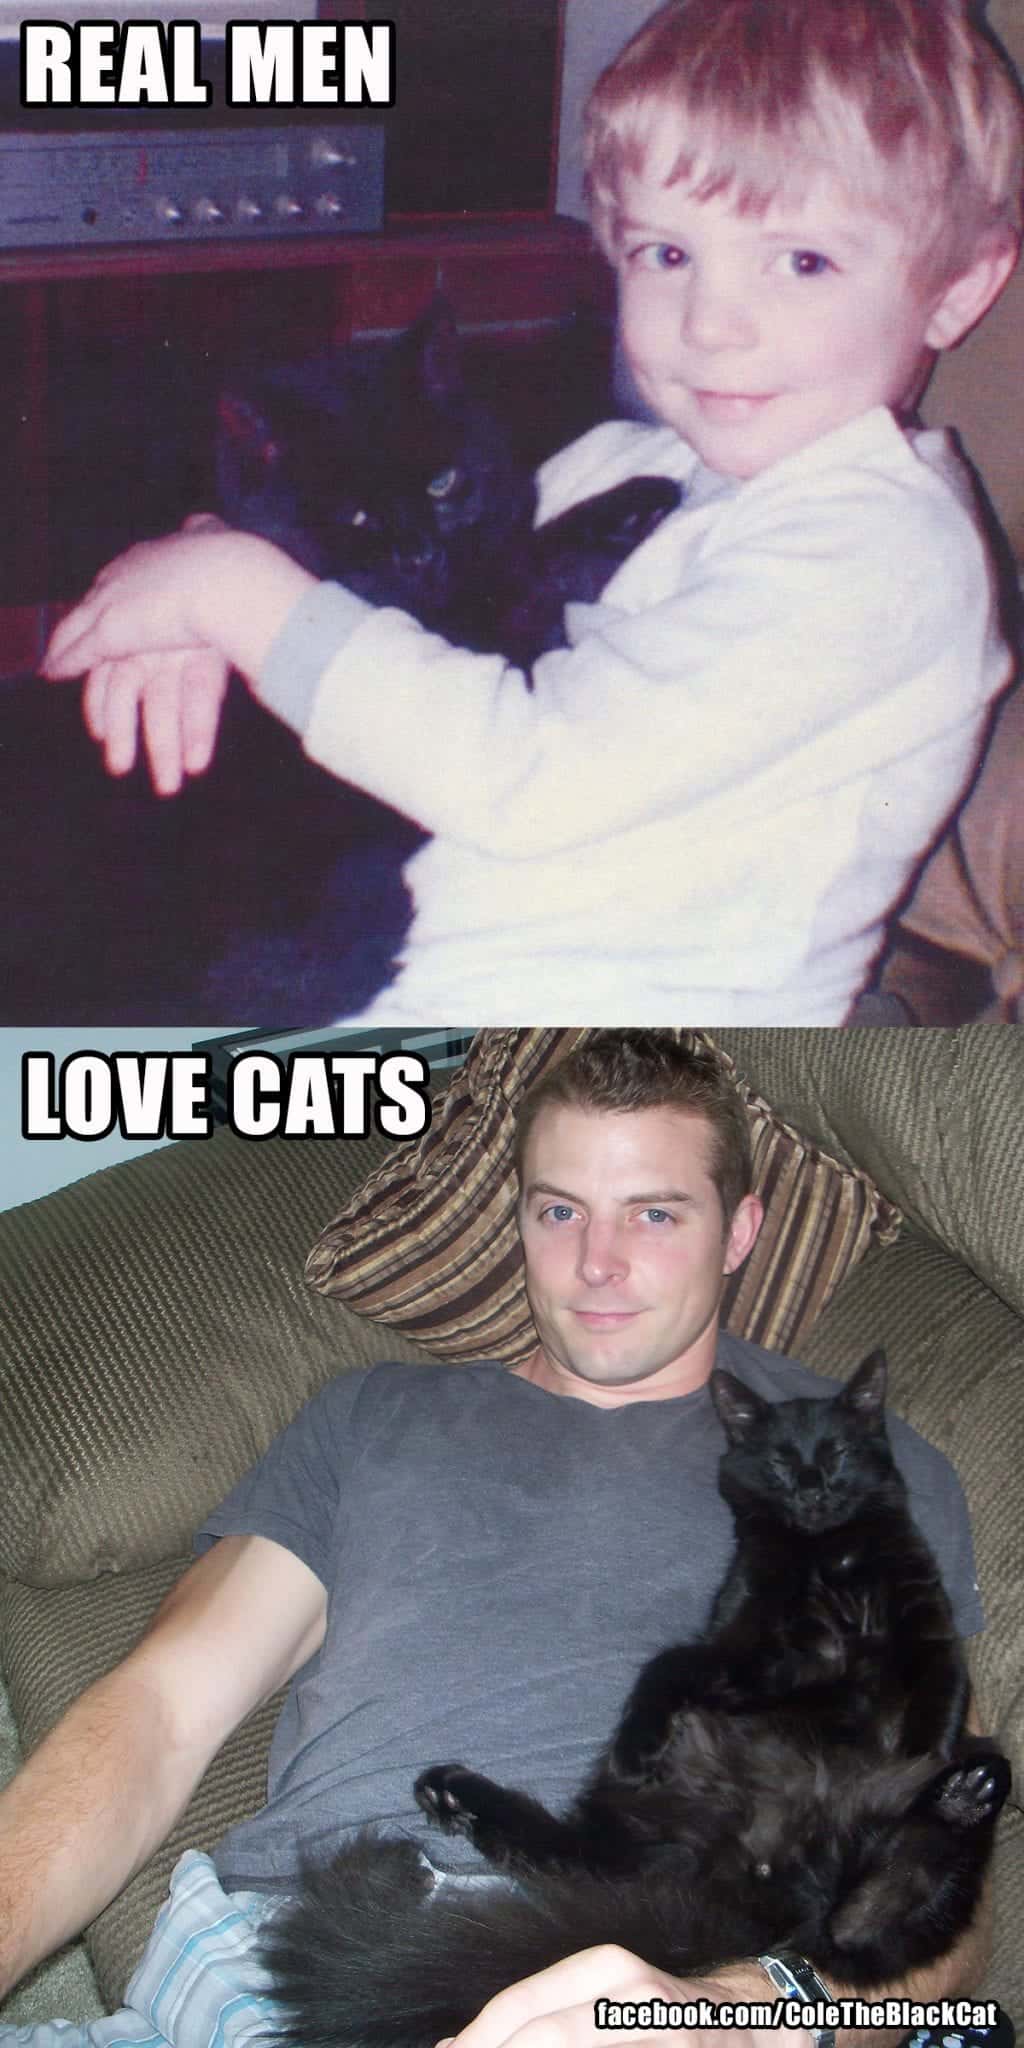 Real Men Love Cats! 1985 - Present Day!